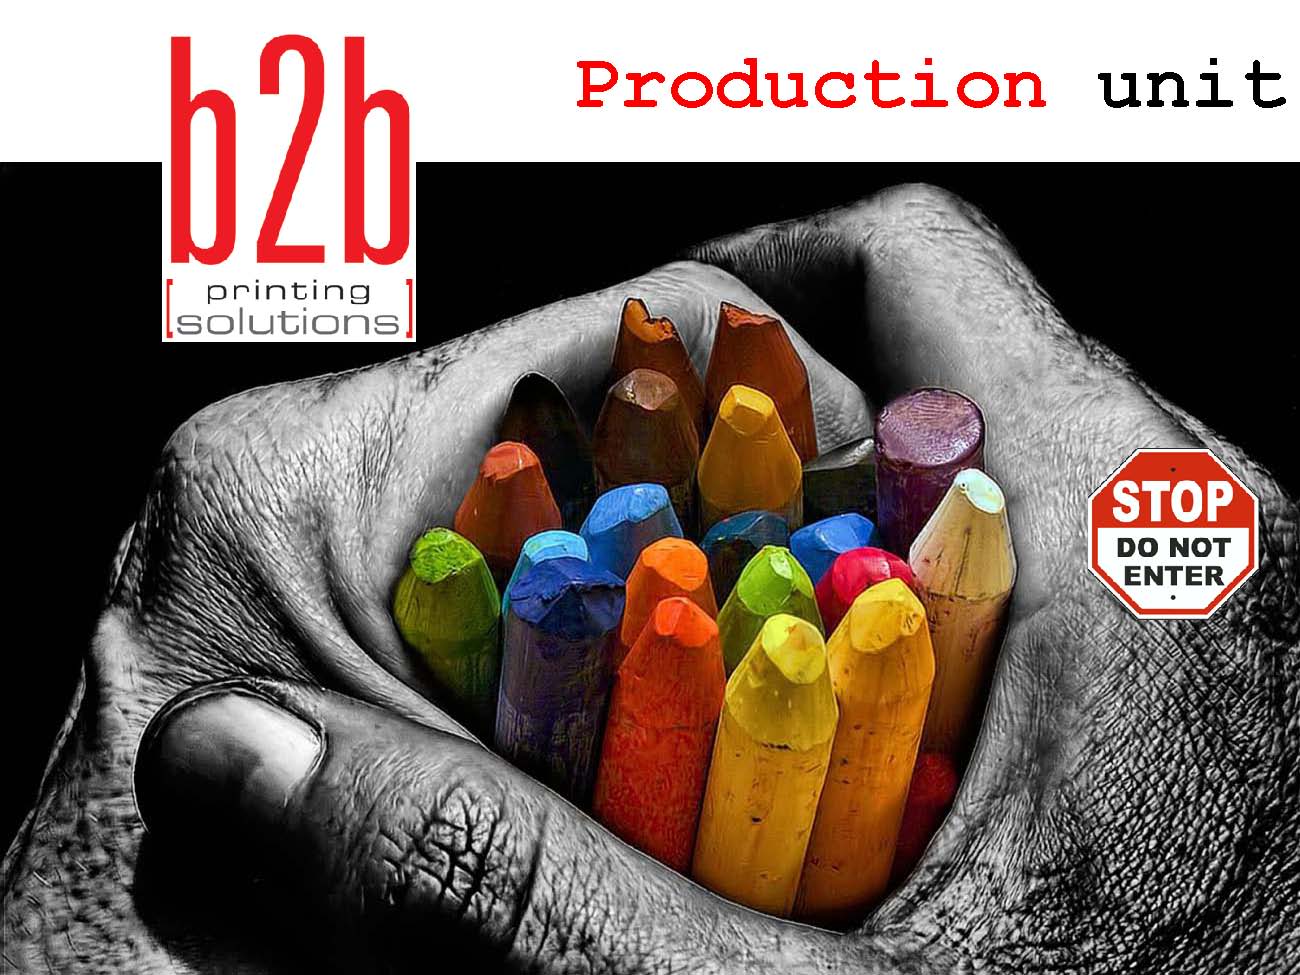 b2b Solutions is expanding, doubling its production square footage